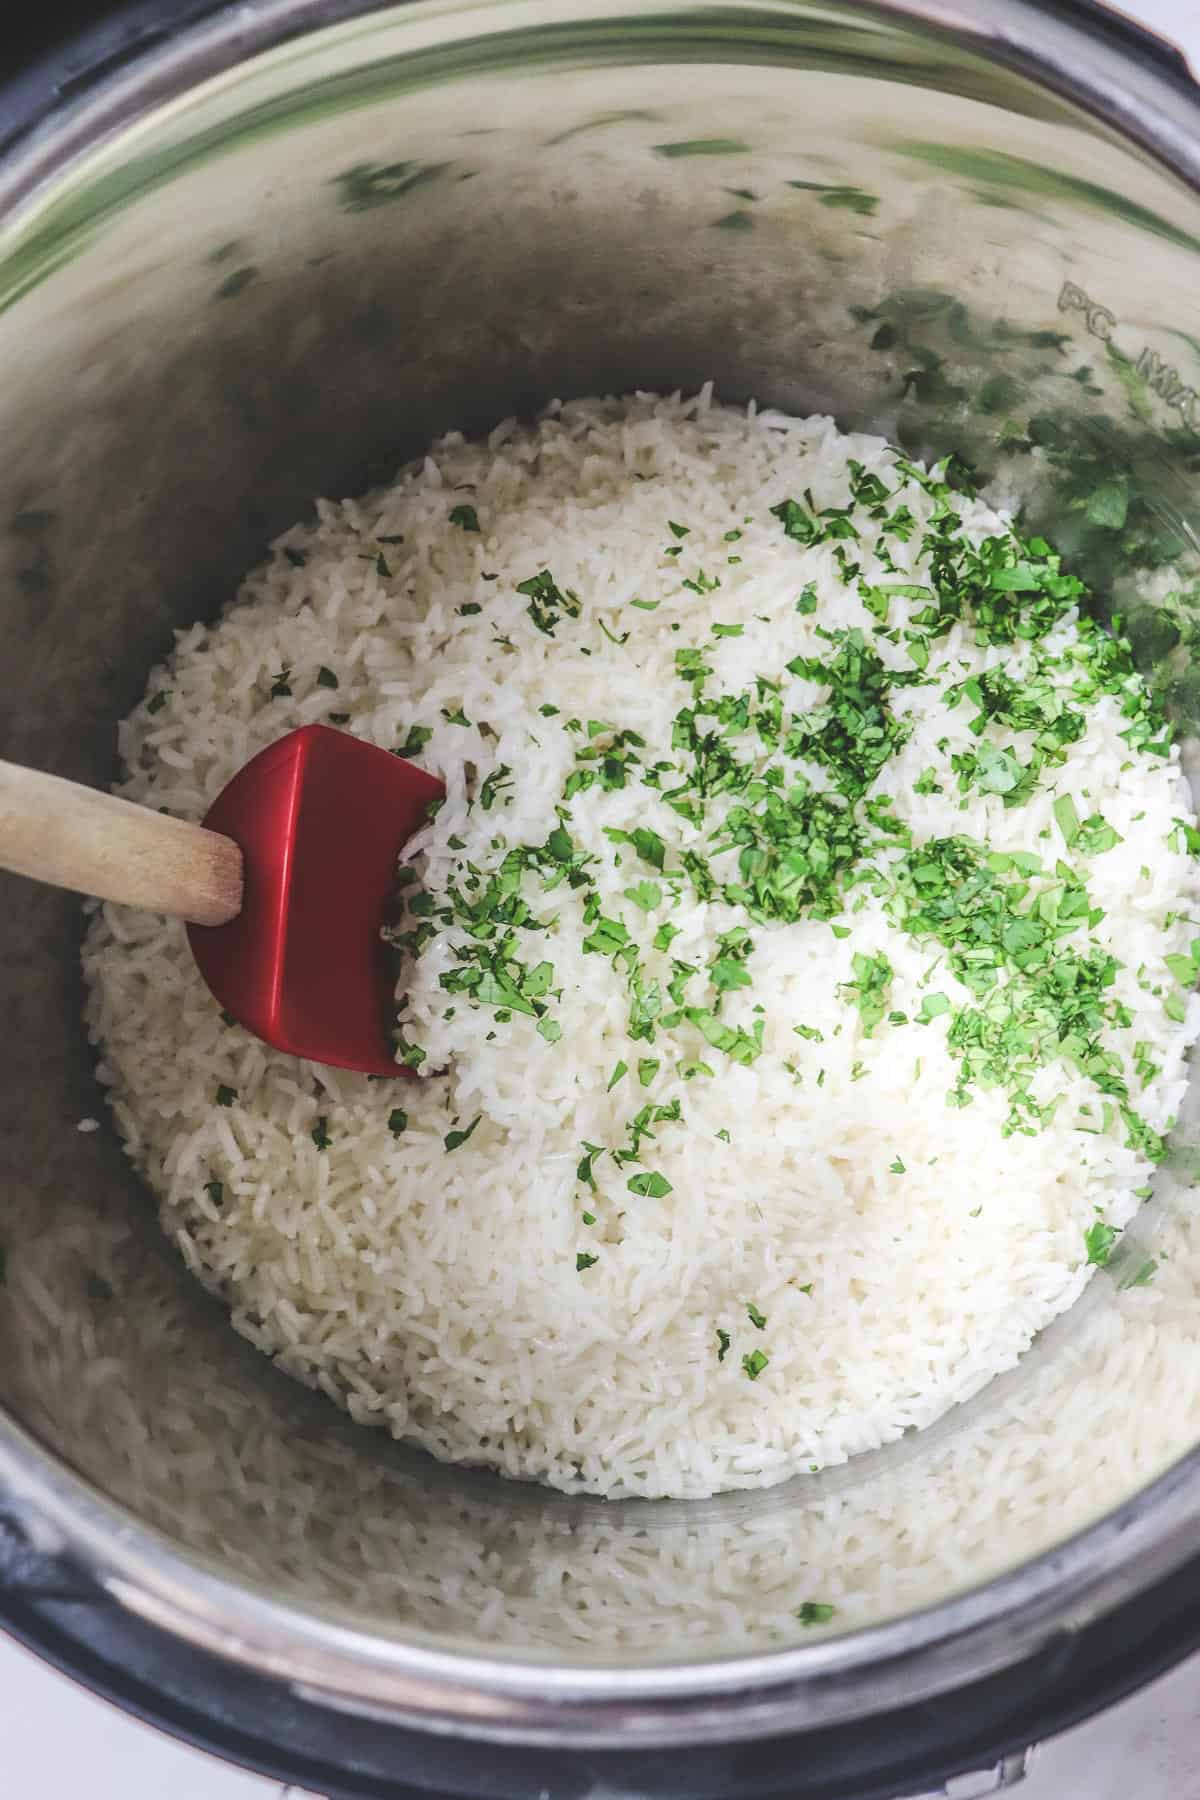 mixing fresh cilantro into the rice in the instant pot